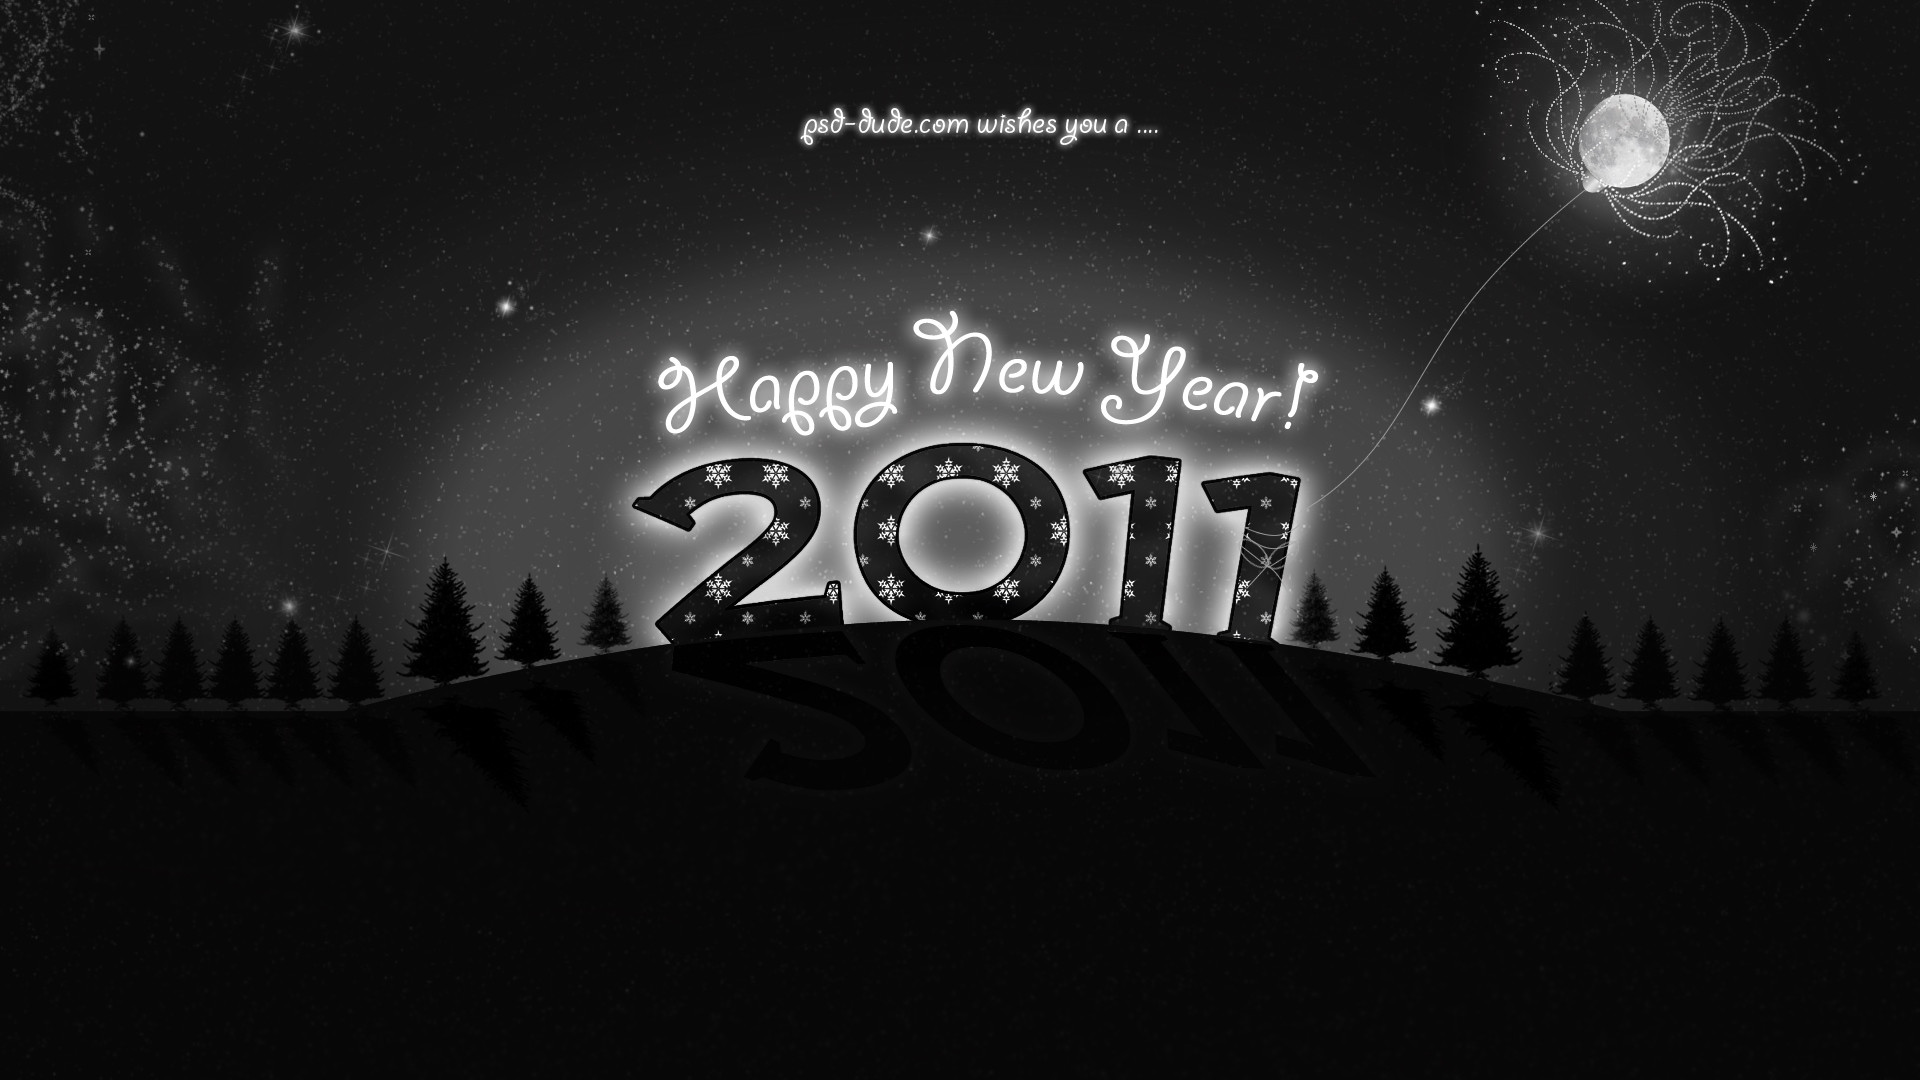 1920x1080 Download Happy New Year 2011 Wallpaper size 